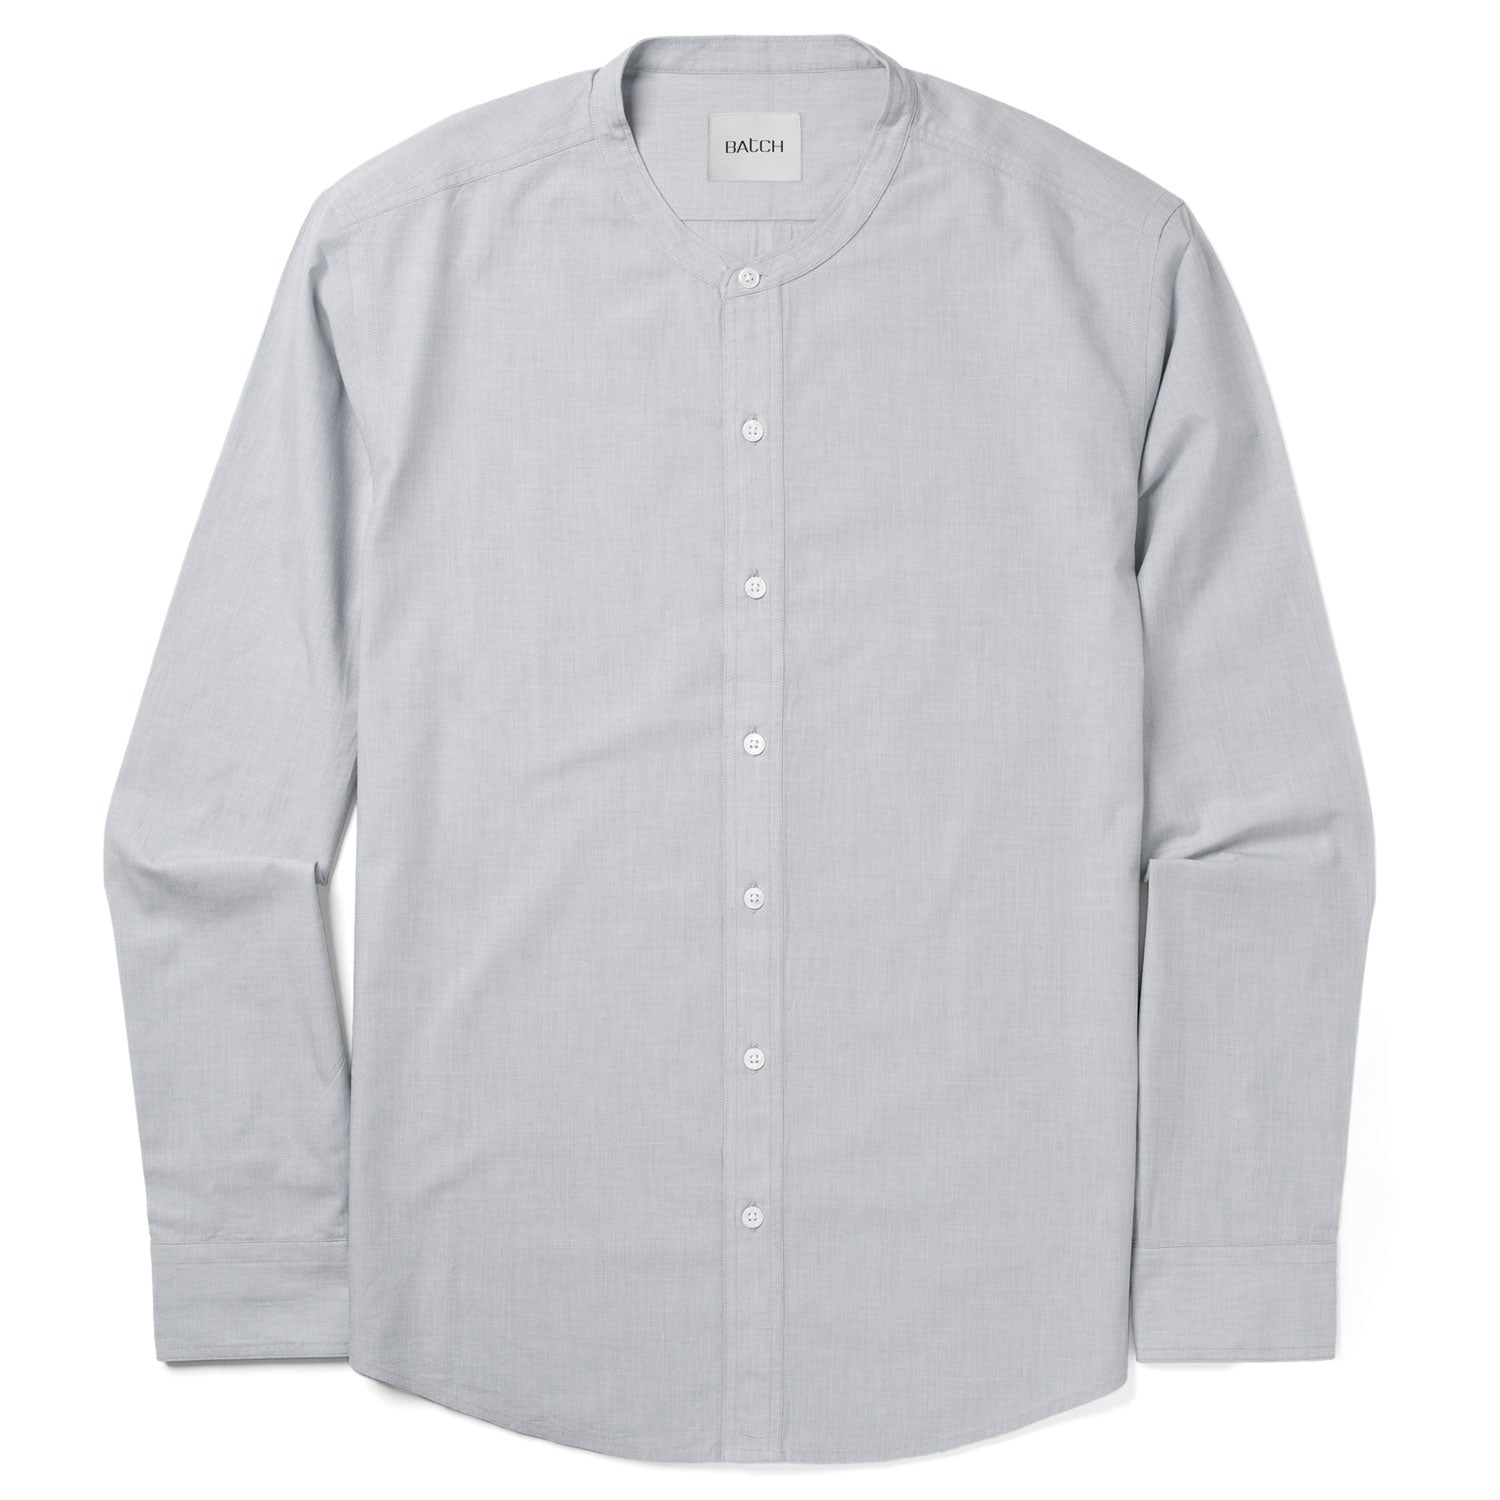 Essential Band Collar Button Down Shirt - Aluminum Gray Cotton End-on-end